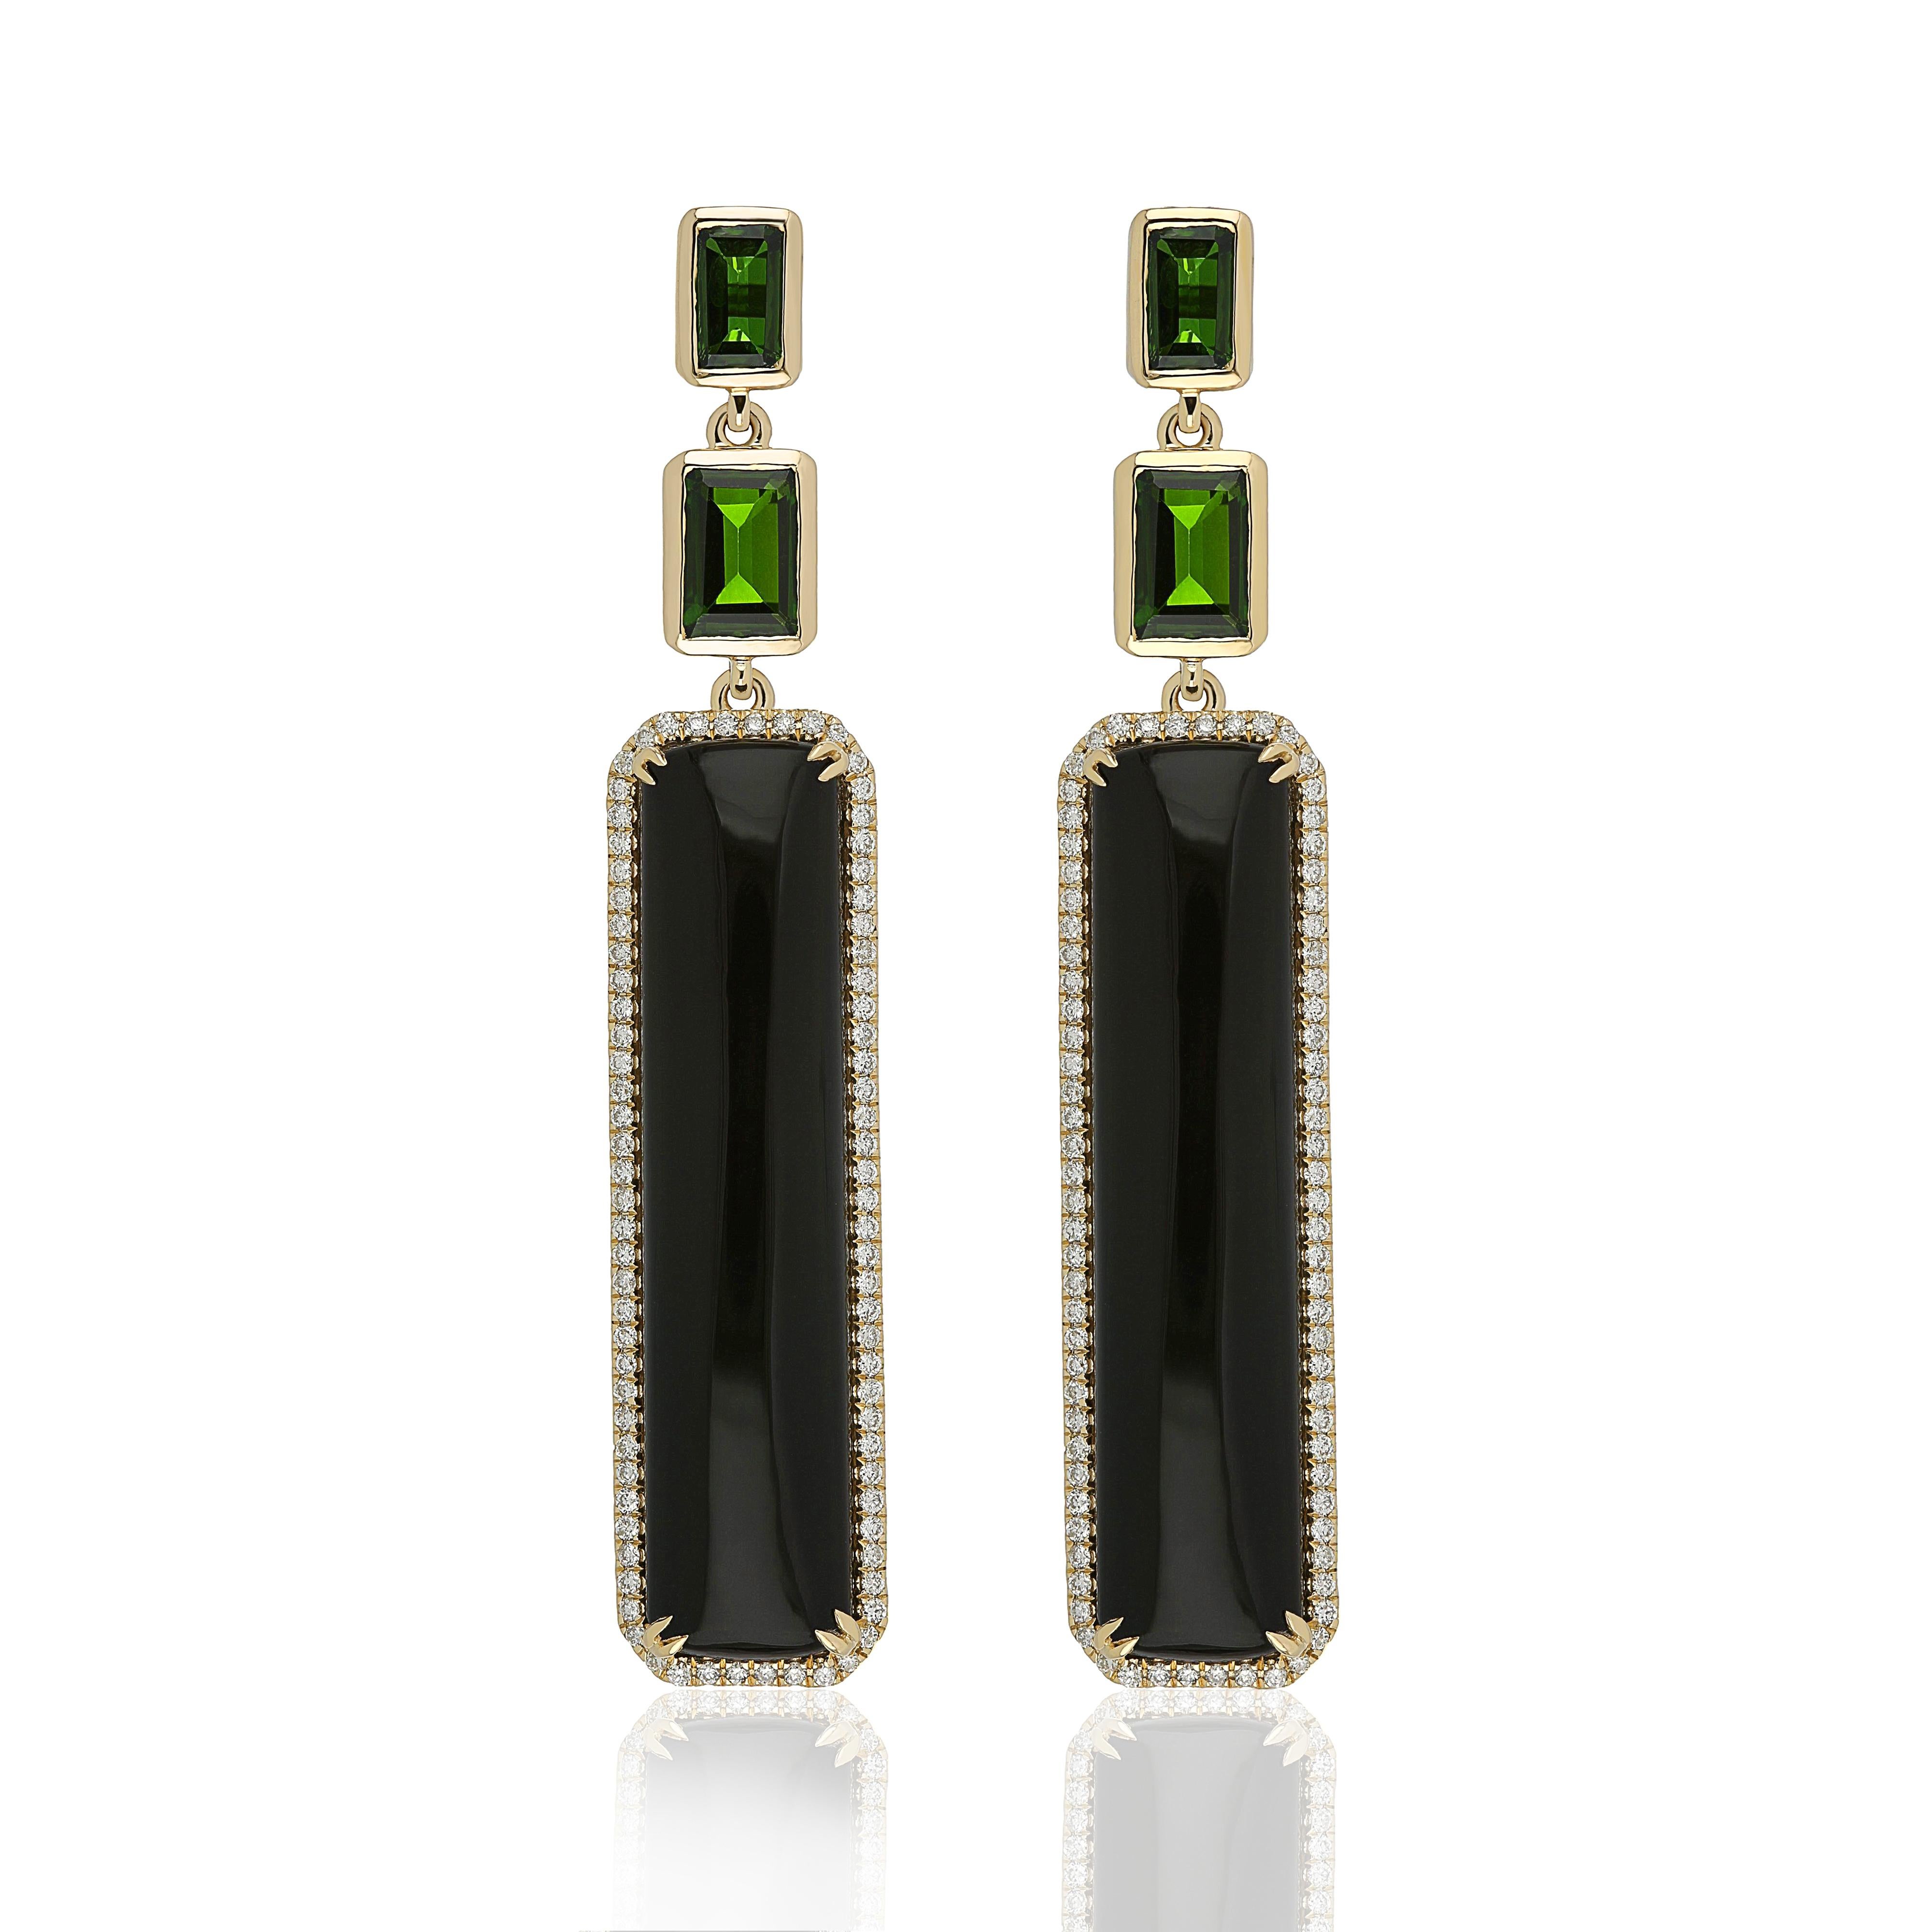 Elegant and exquisitely detailed 14 Karat Yellow Gold Earring, center set with 17.95Cts .Octagon Shape Black Onyx with Chrome Diopside  with 3.34 Cts and micro pave set Diamonds, weighing approx. 0.580Cts Beautifully Hand crafted in 14 Karat Yellow